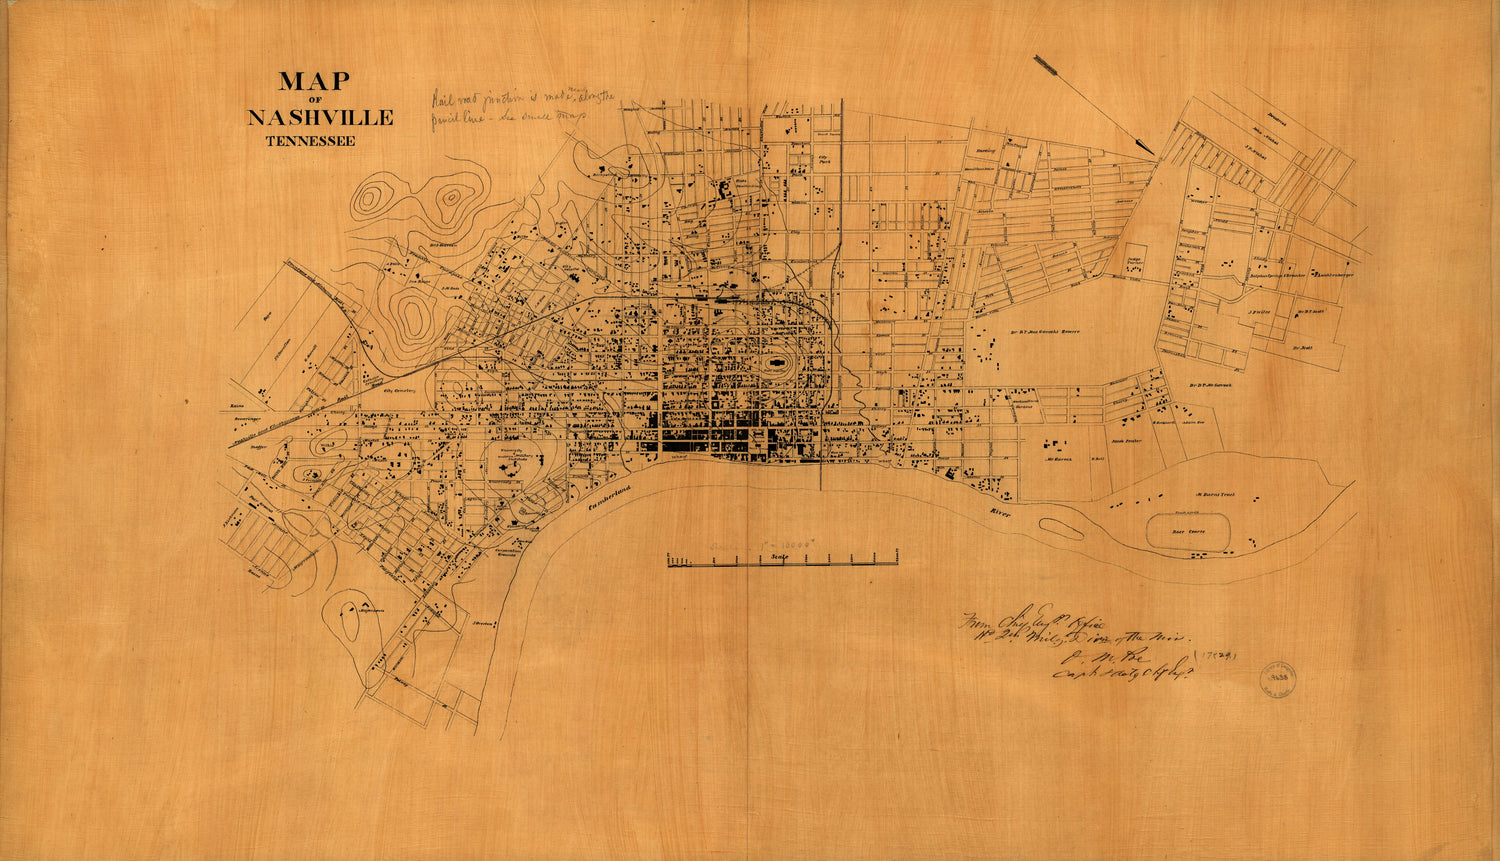 This old map of Map of Nashville, Tennessee from 1860 was created by O. M. (Orlando Metcalfe) Poe,  United States. Army. Military Division of the Mississippi. Chief Engrs. Office in 1860